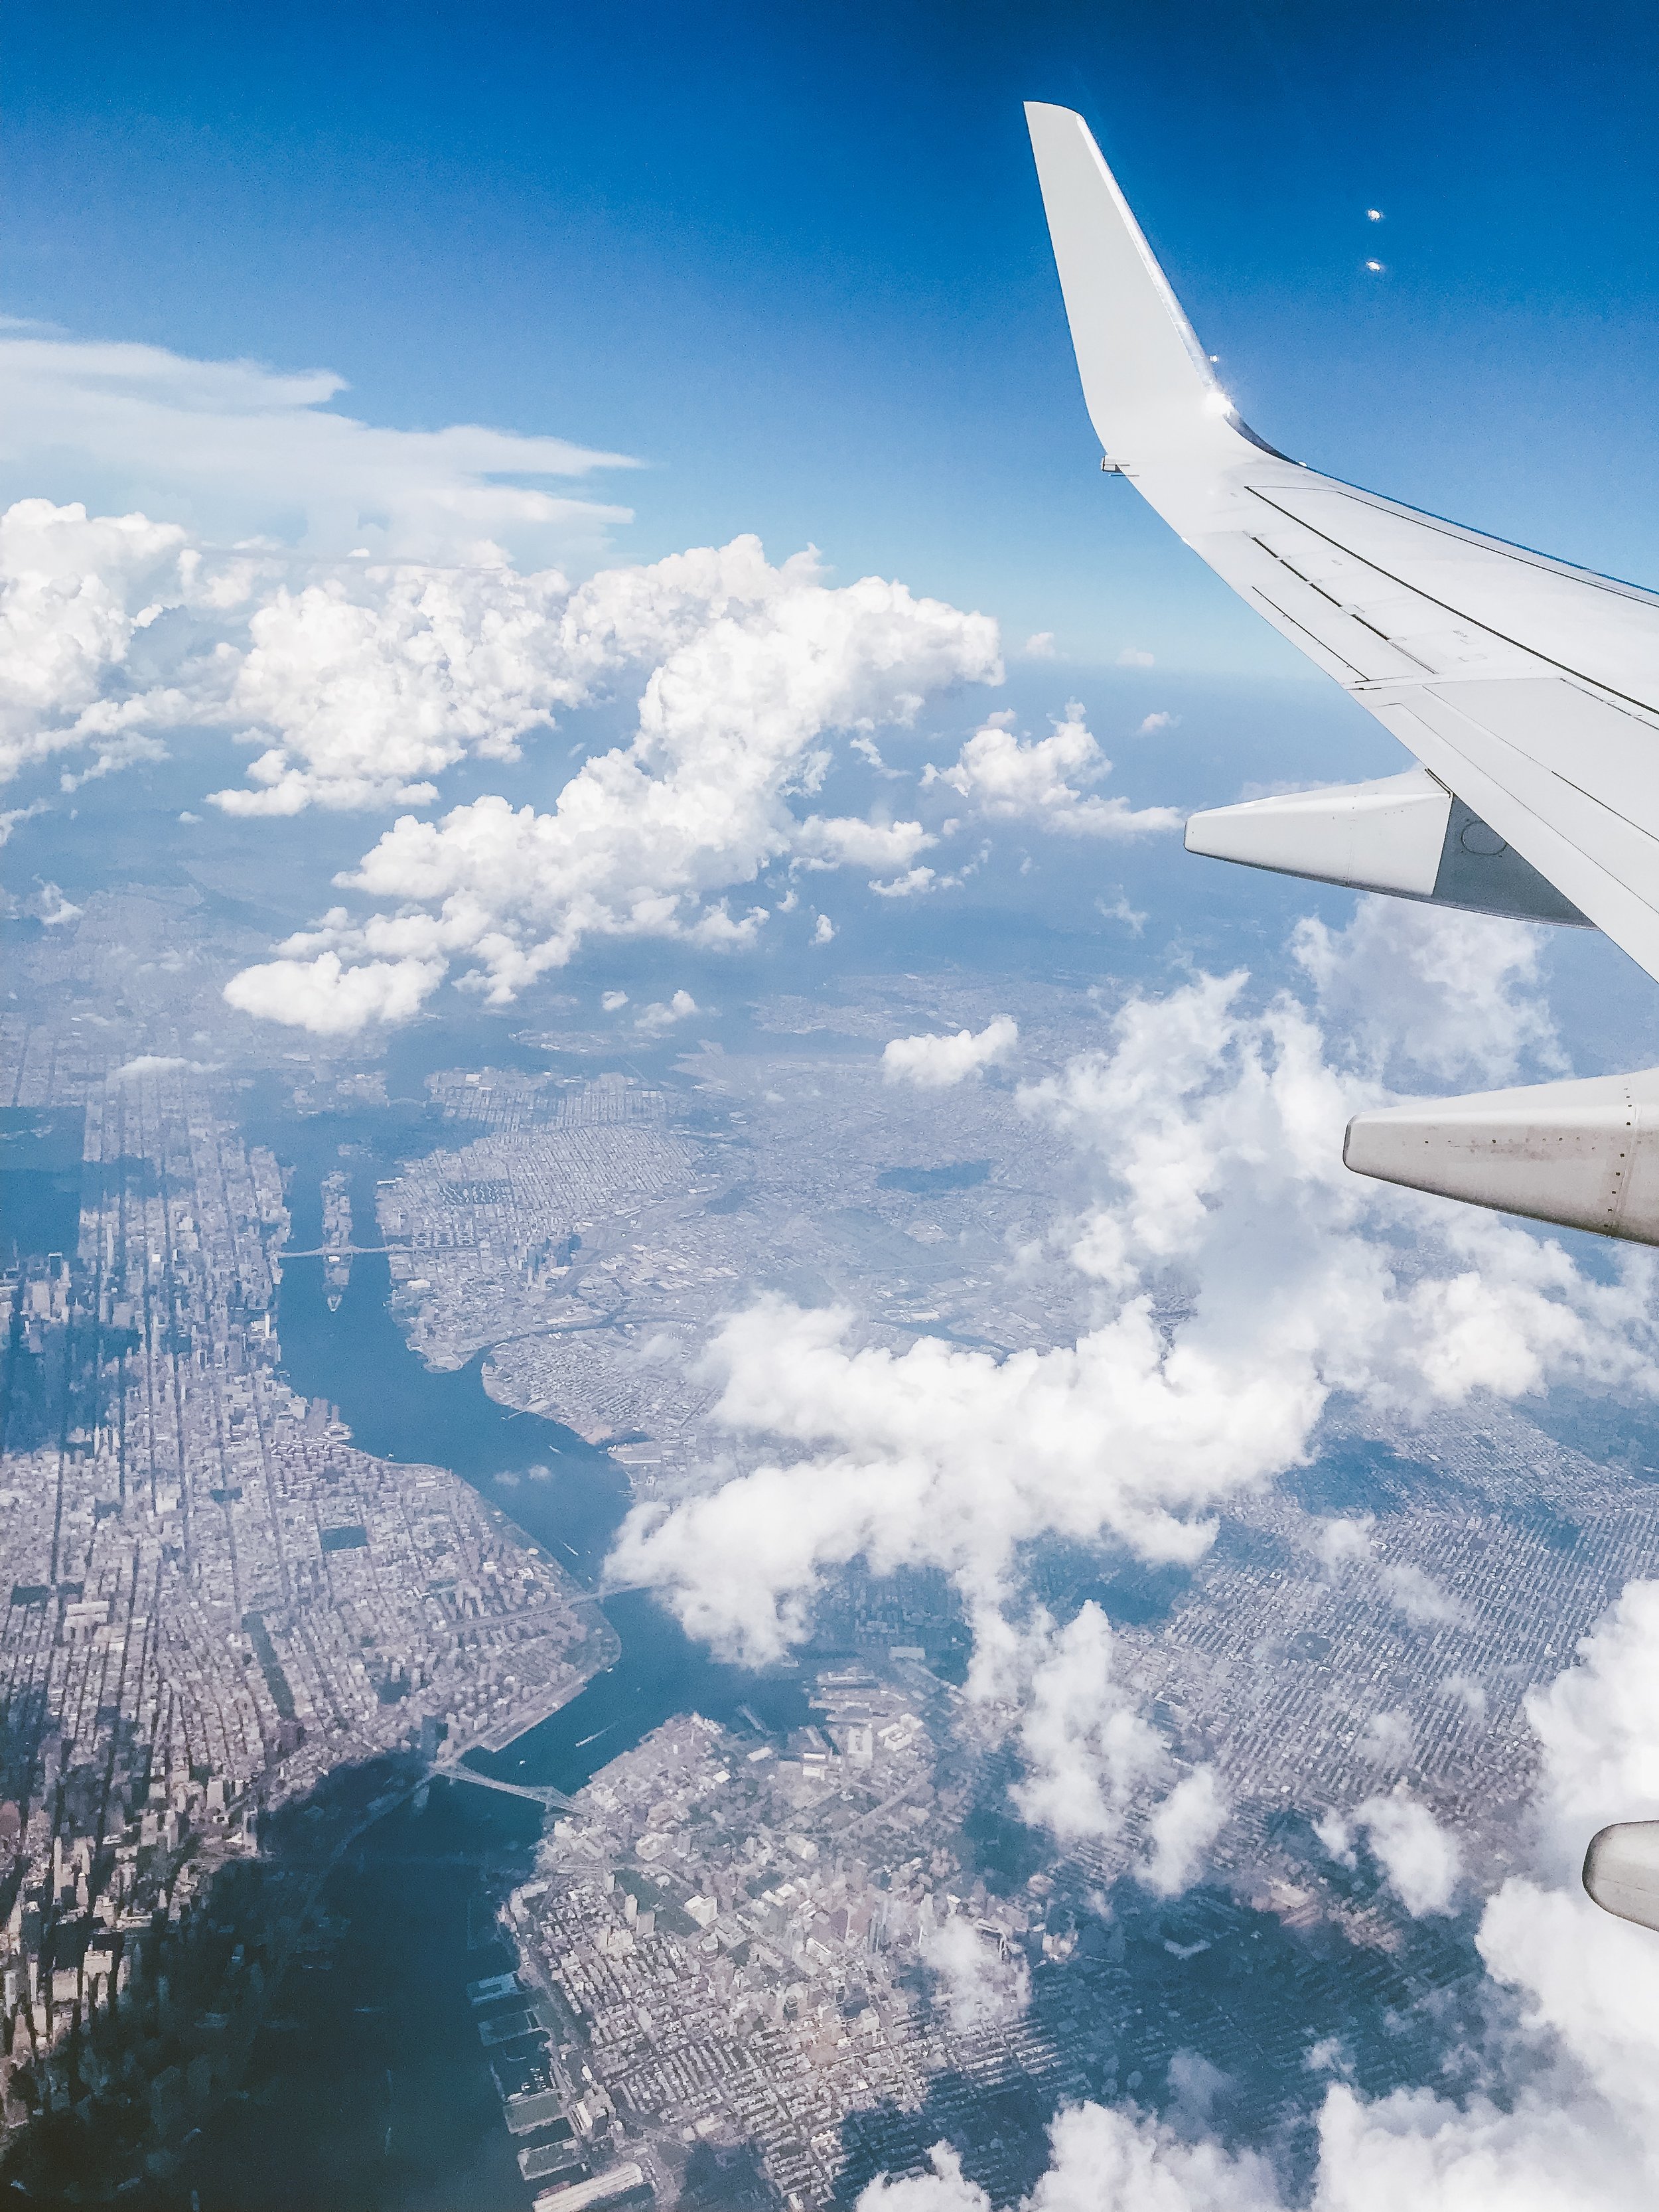 Bre Sheppard - My First NYFW - View Of NYC From The Plane.JPG